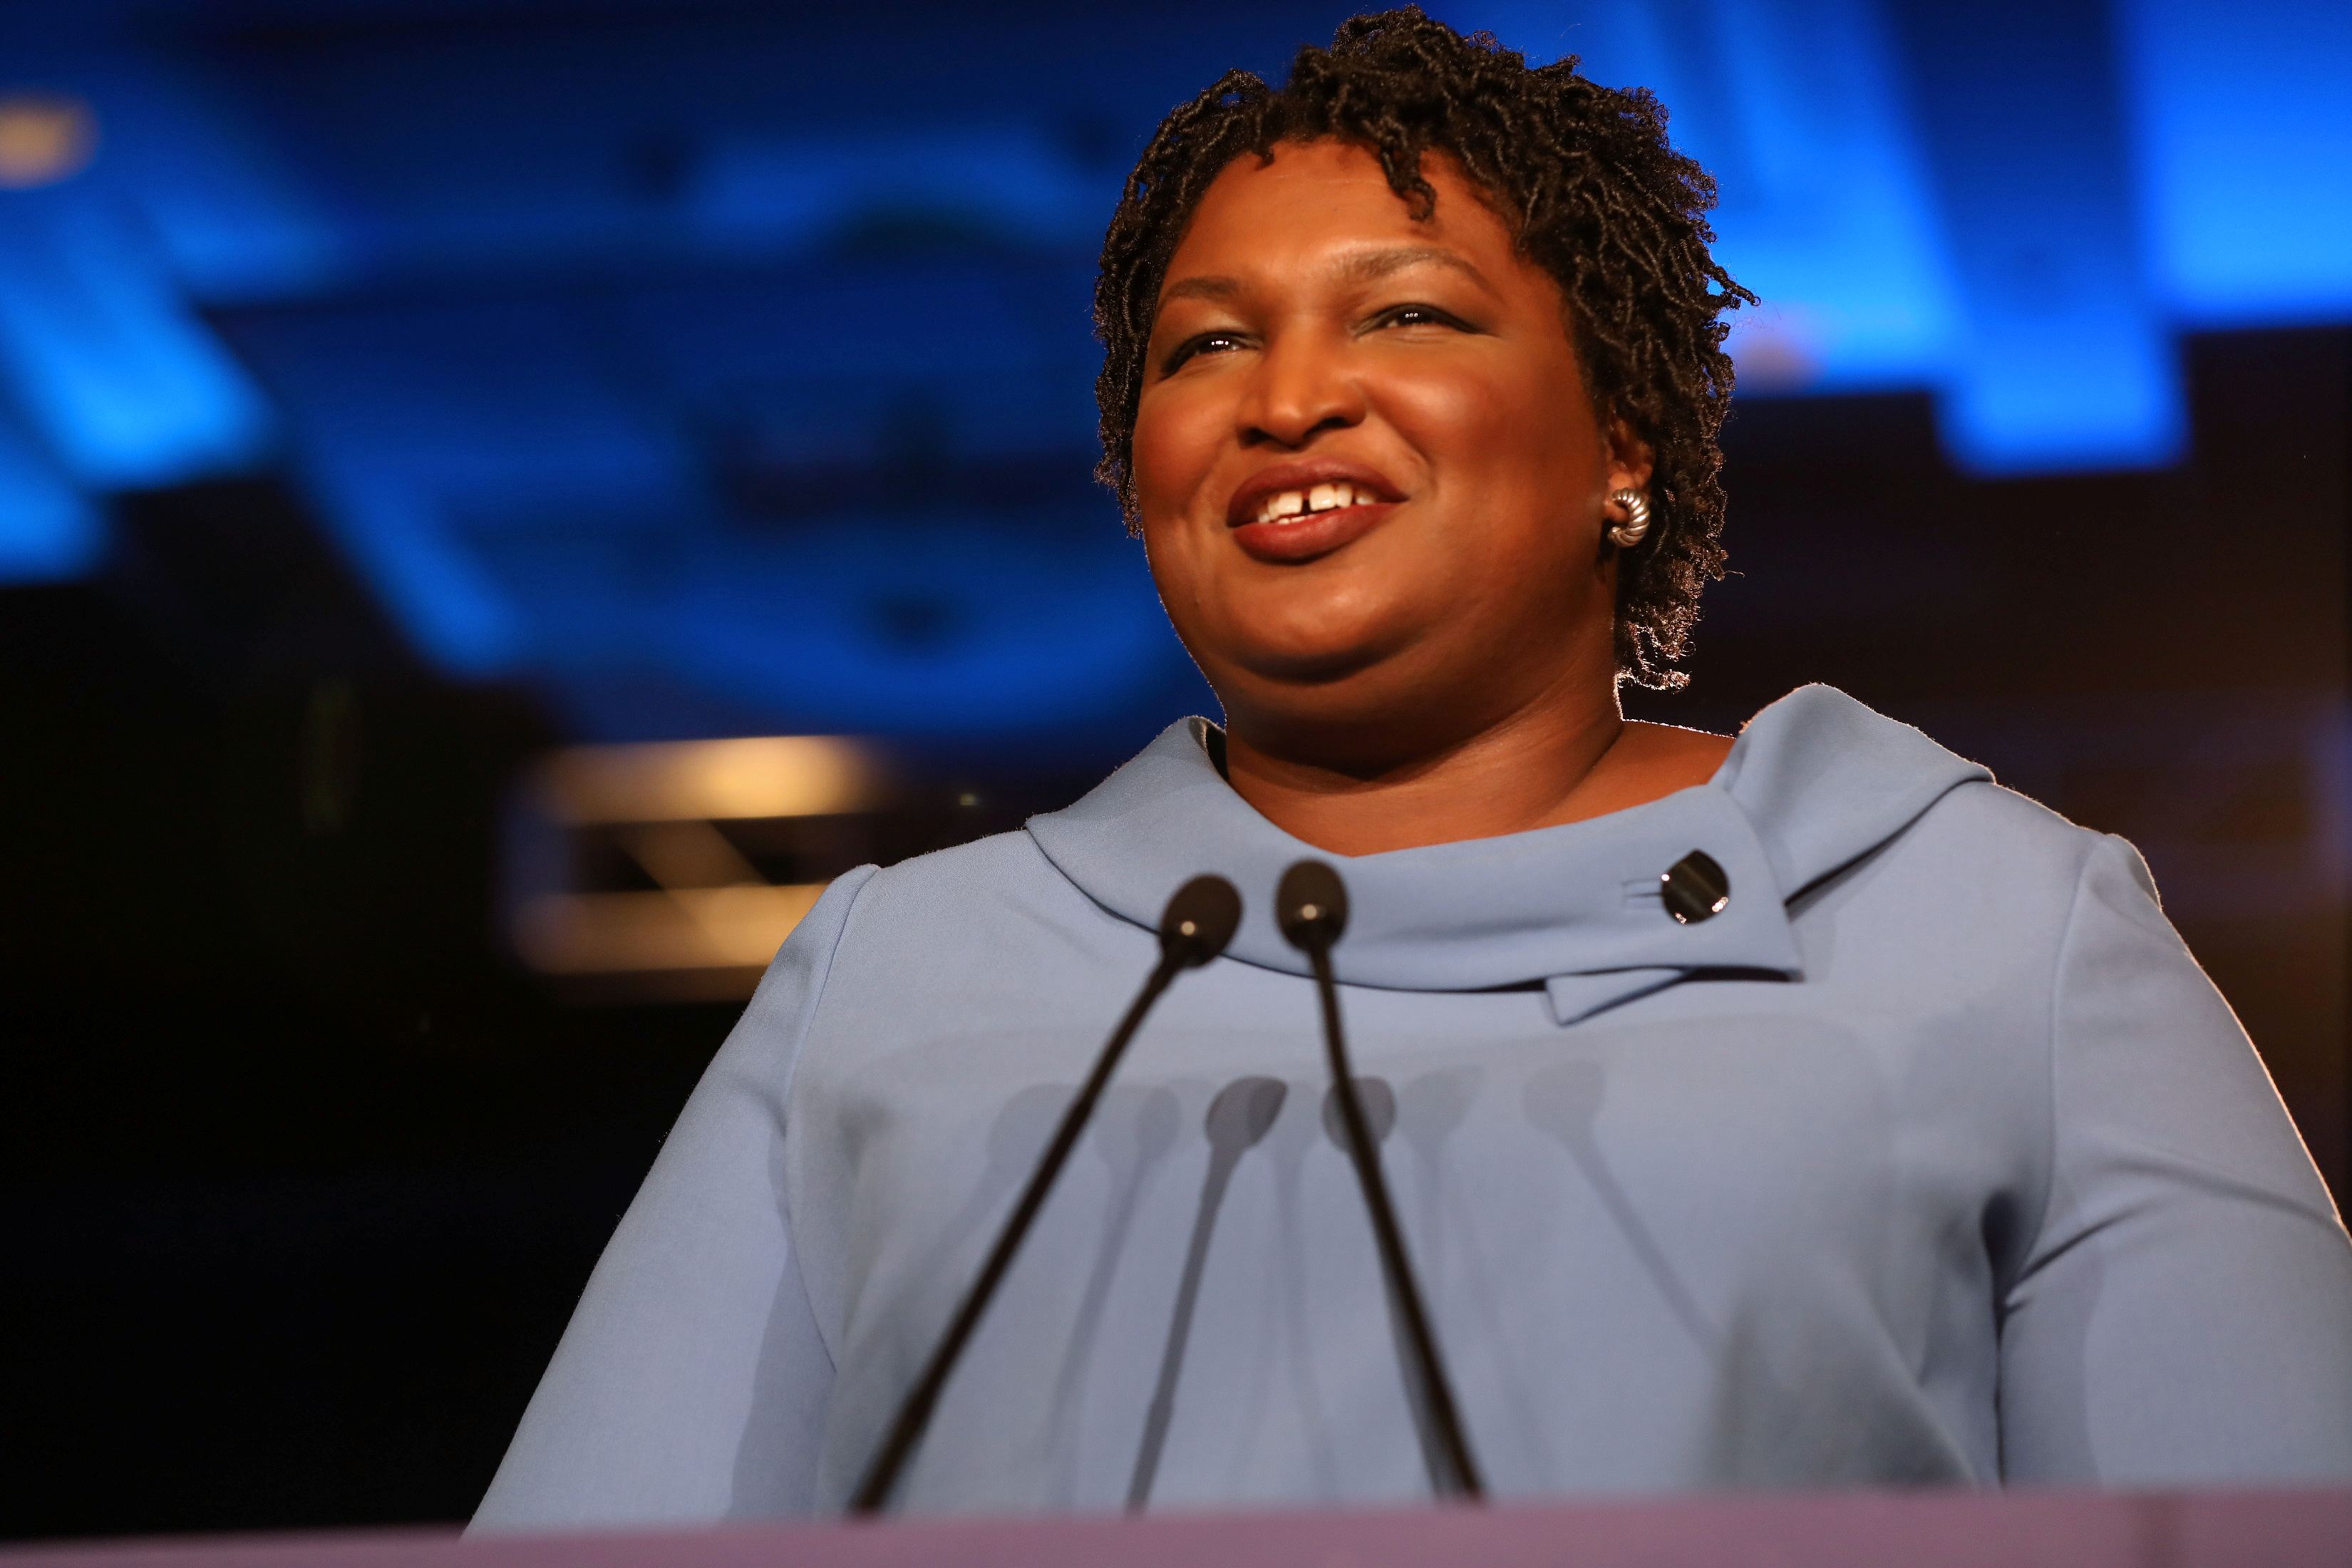 Stacey Abrams speaks to the crowd of supporters announcing they will wait till the morning for results of the mid-terms election at the Hyatt Regency in Atlanta, Georgia, U.S. November 7, 2018. REUTERS/Lawrence Bryant - RC19D7CE1860